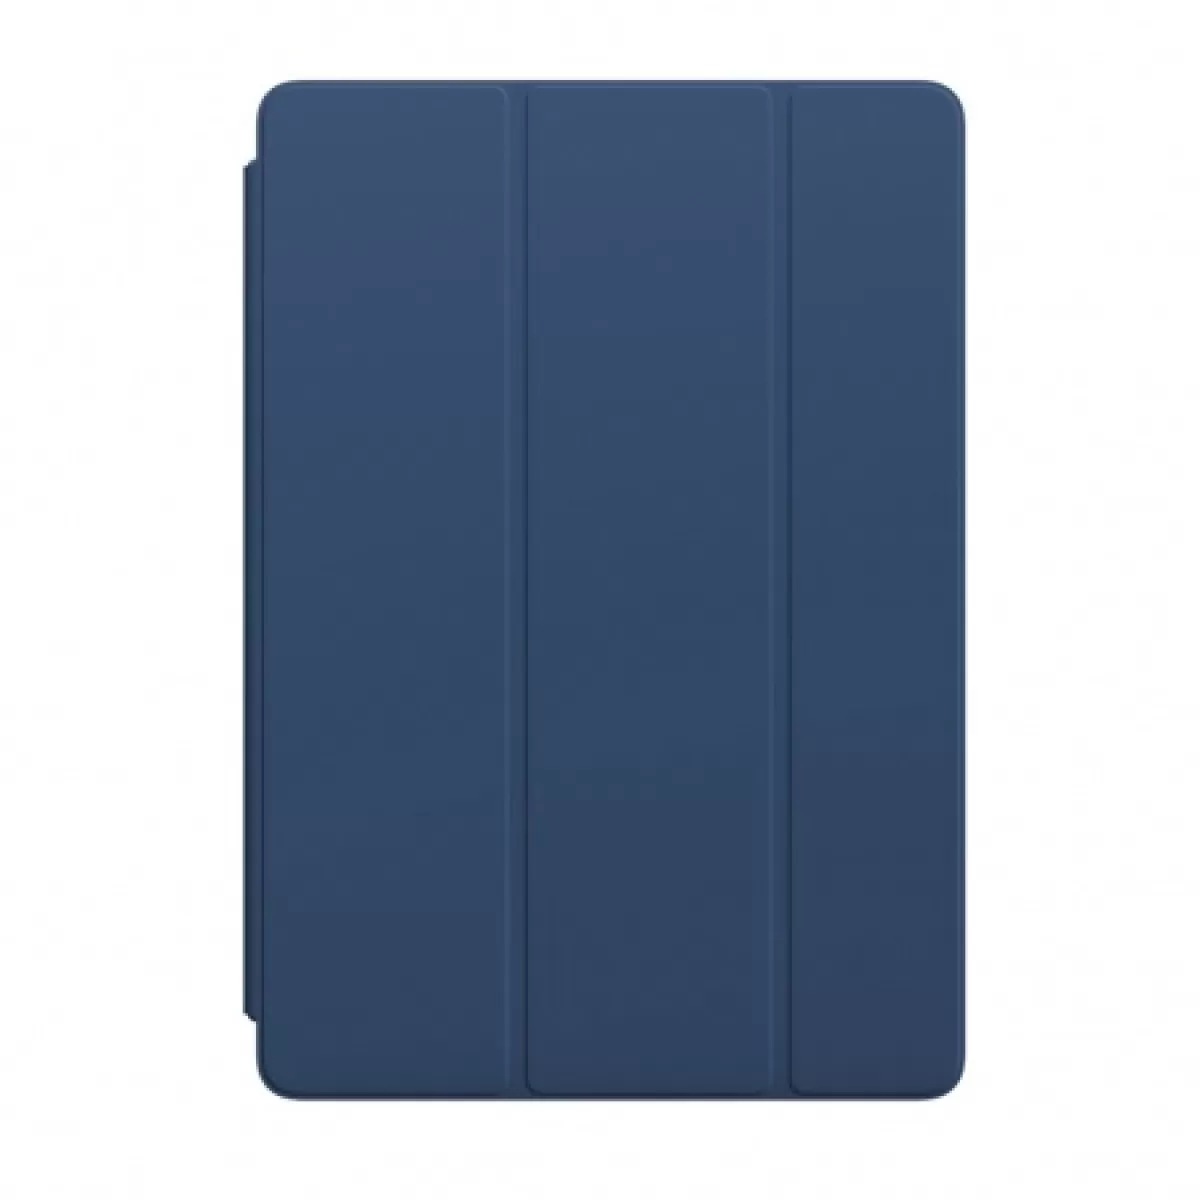 Apple Smart Cover for 10.5inch iPad Pro Blue Cobalt